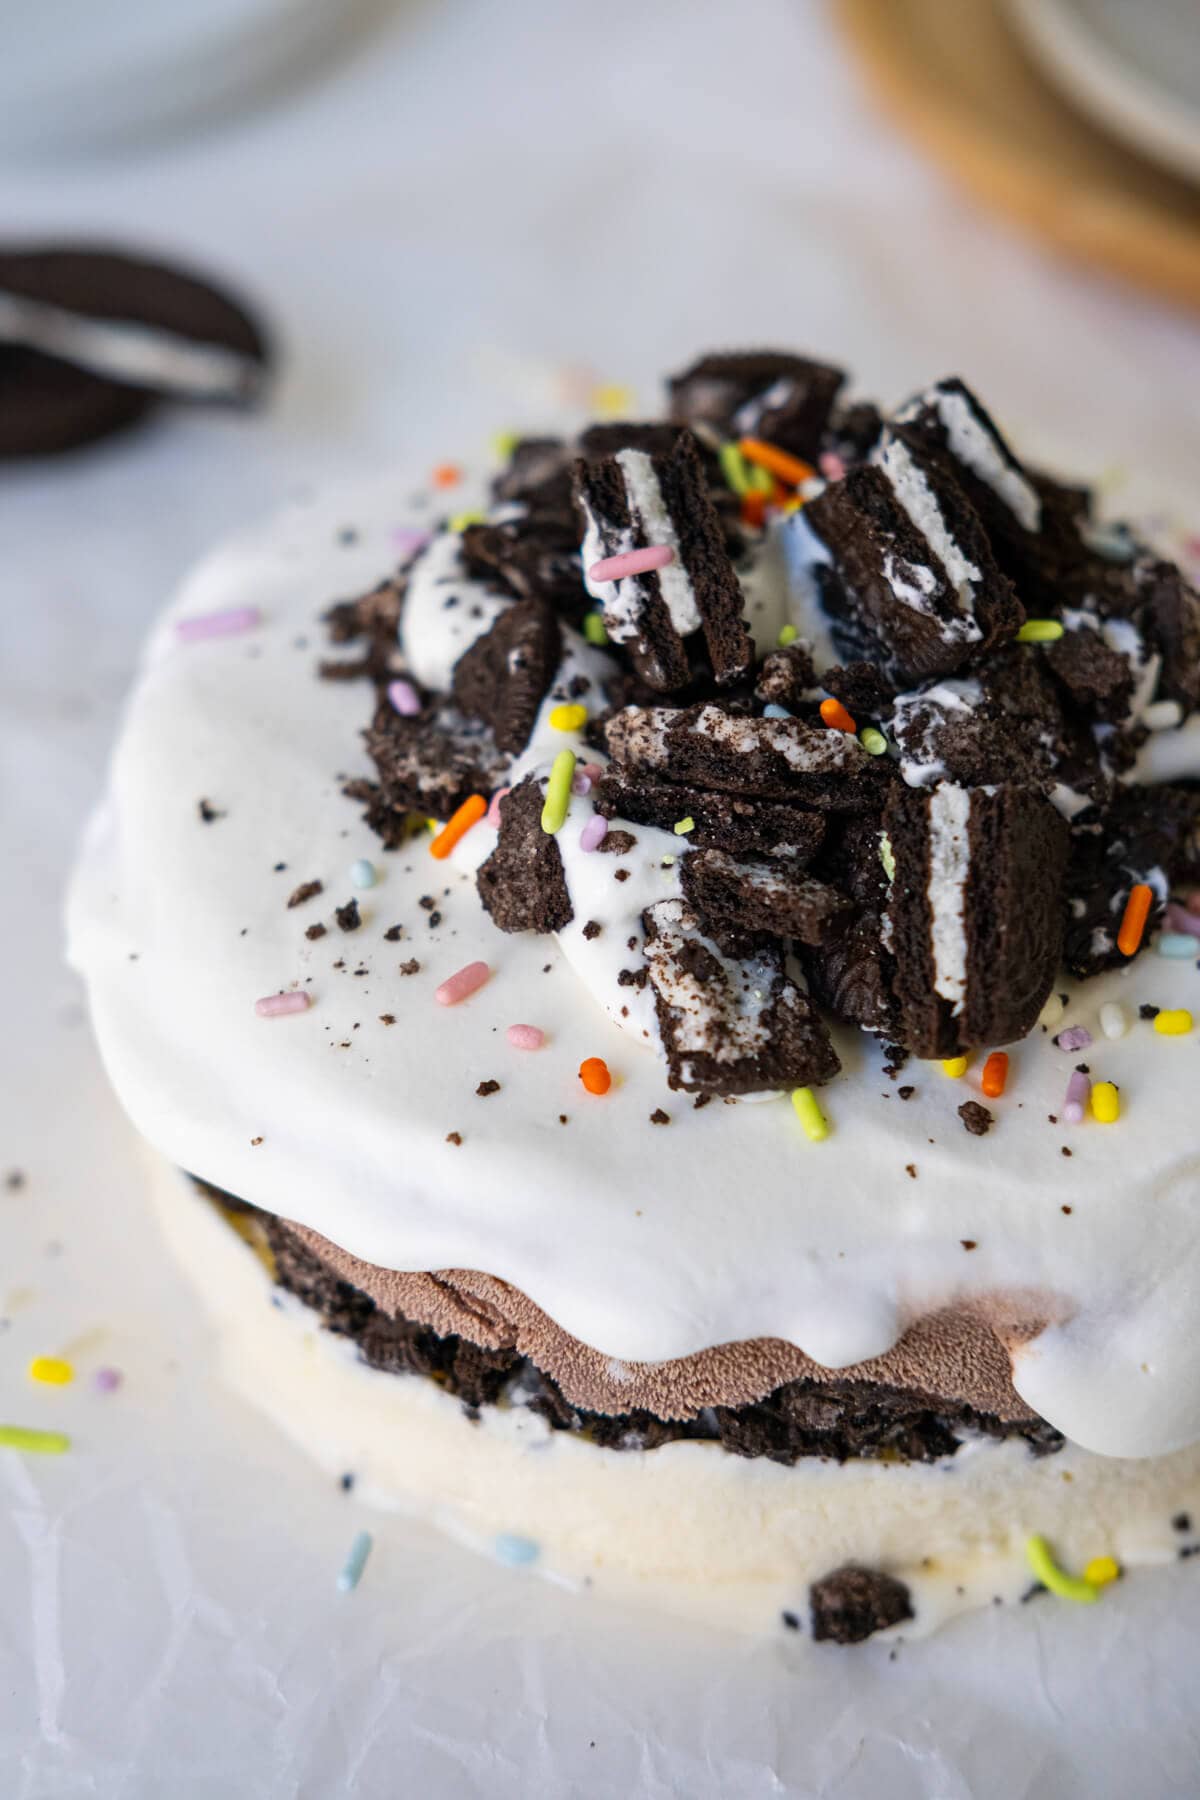 Ice cream cake with Oreo crumbs and sprinkles on top.